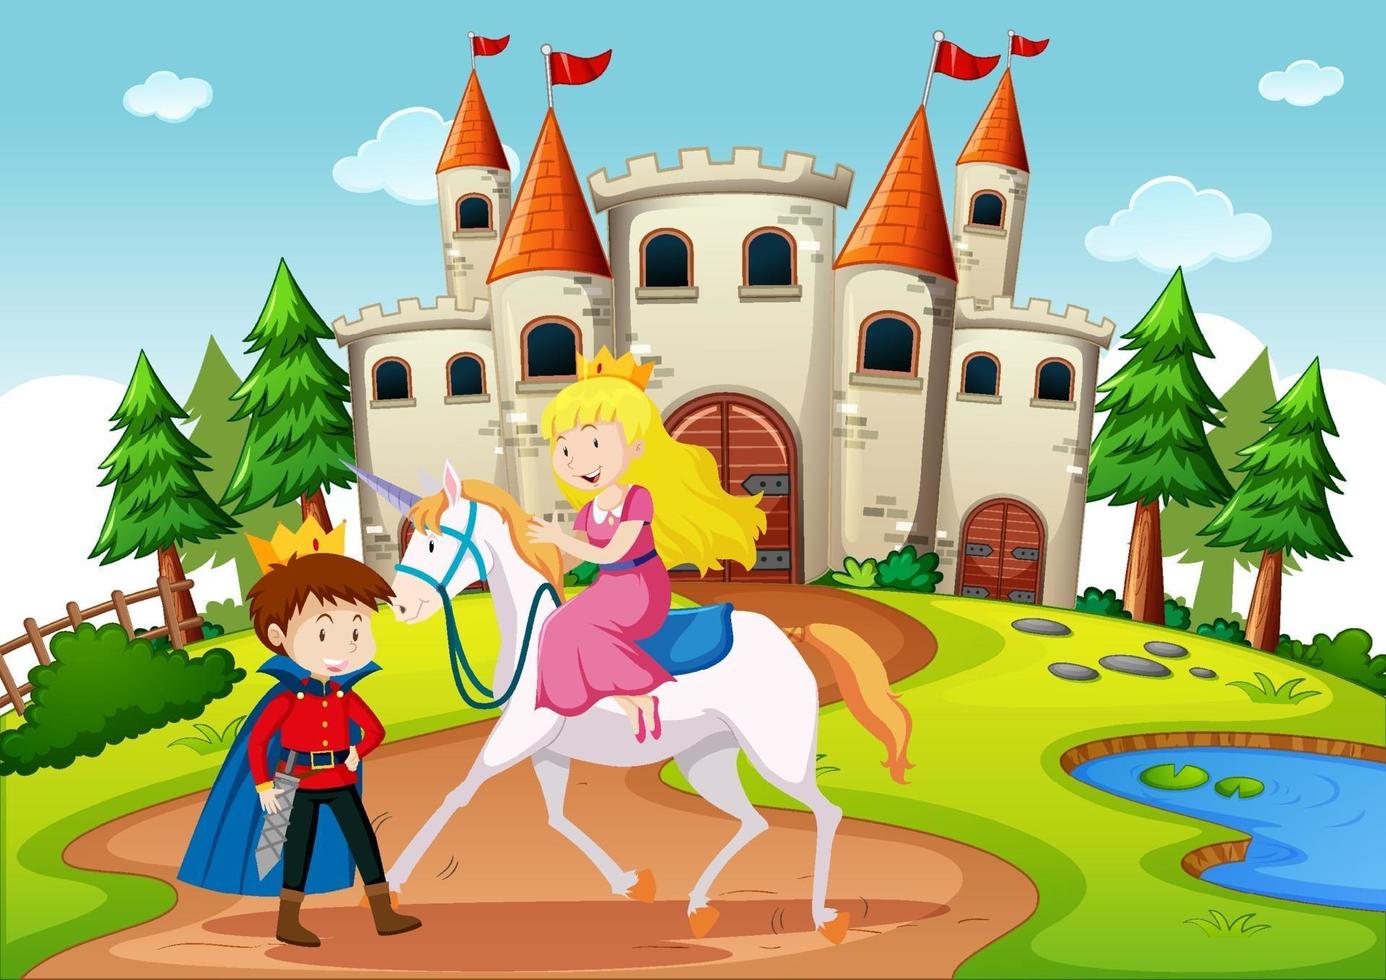 Prince and princess in fairytale land scene vector